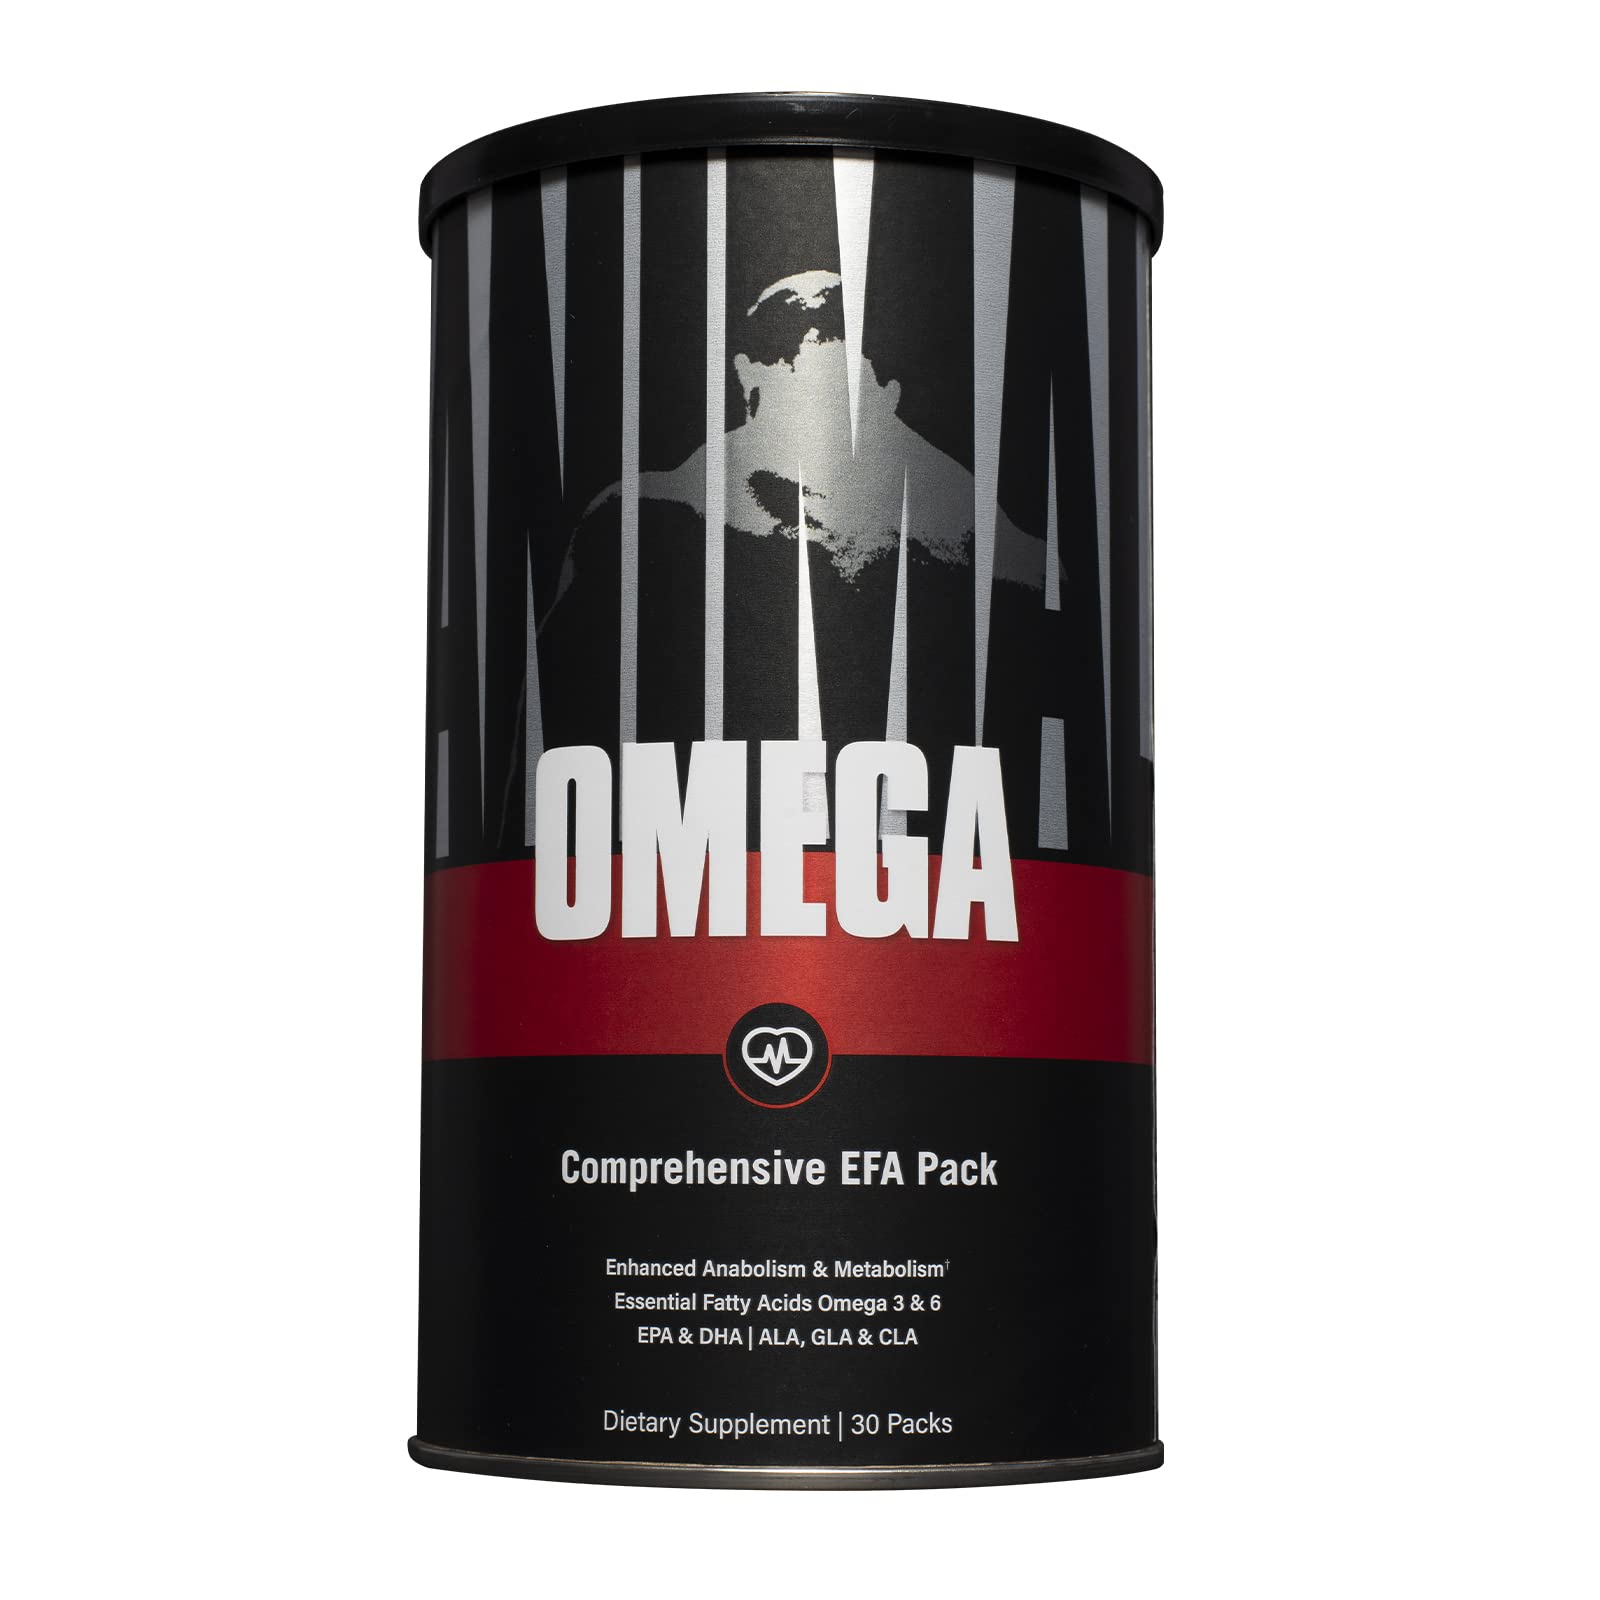 Book Cover Animal Omega - Omega 3 6 Supplement - Fish Oil, Flaxseed Oil, Salmon Oil, Cod Liver, Herring, and More - 10 Sources of Omegas and EFAs - Full dose of EPA, DHA, CLA + Absorption Complex - 30 Day Pack 30.0 Servings (Pack of 1)